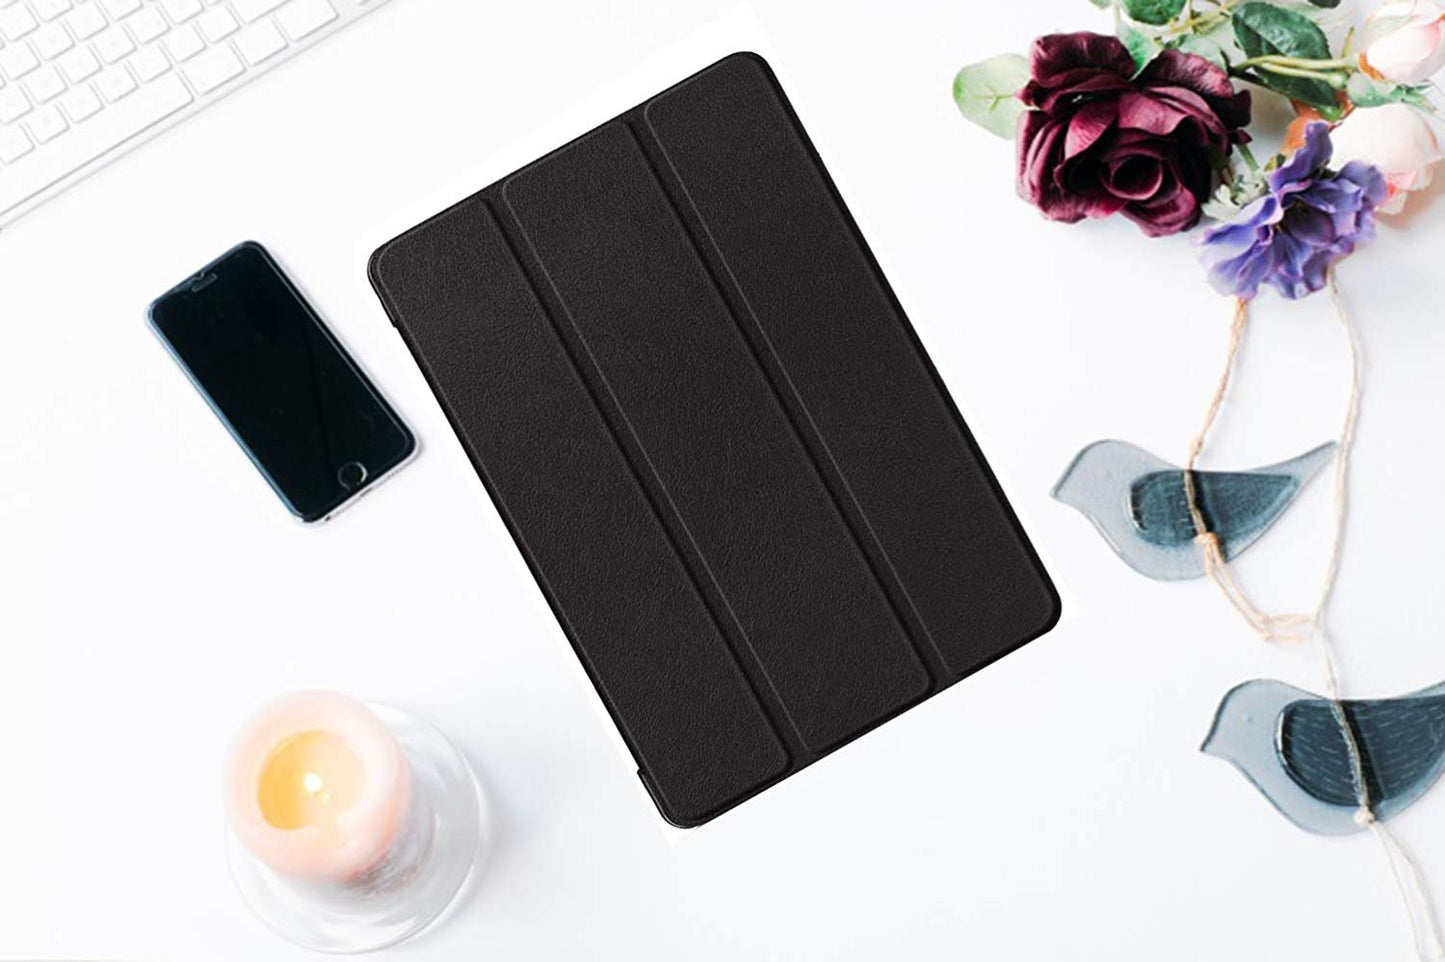 Tablet Case For Samsung Galaxy Tab S4 Tri-fold Stand Cover Hard Shell